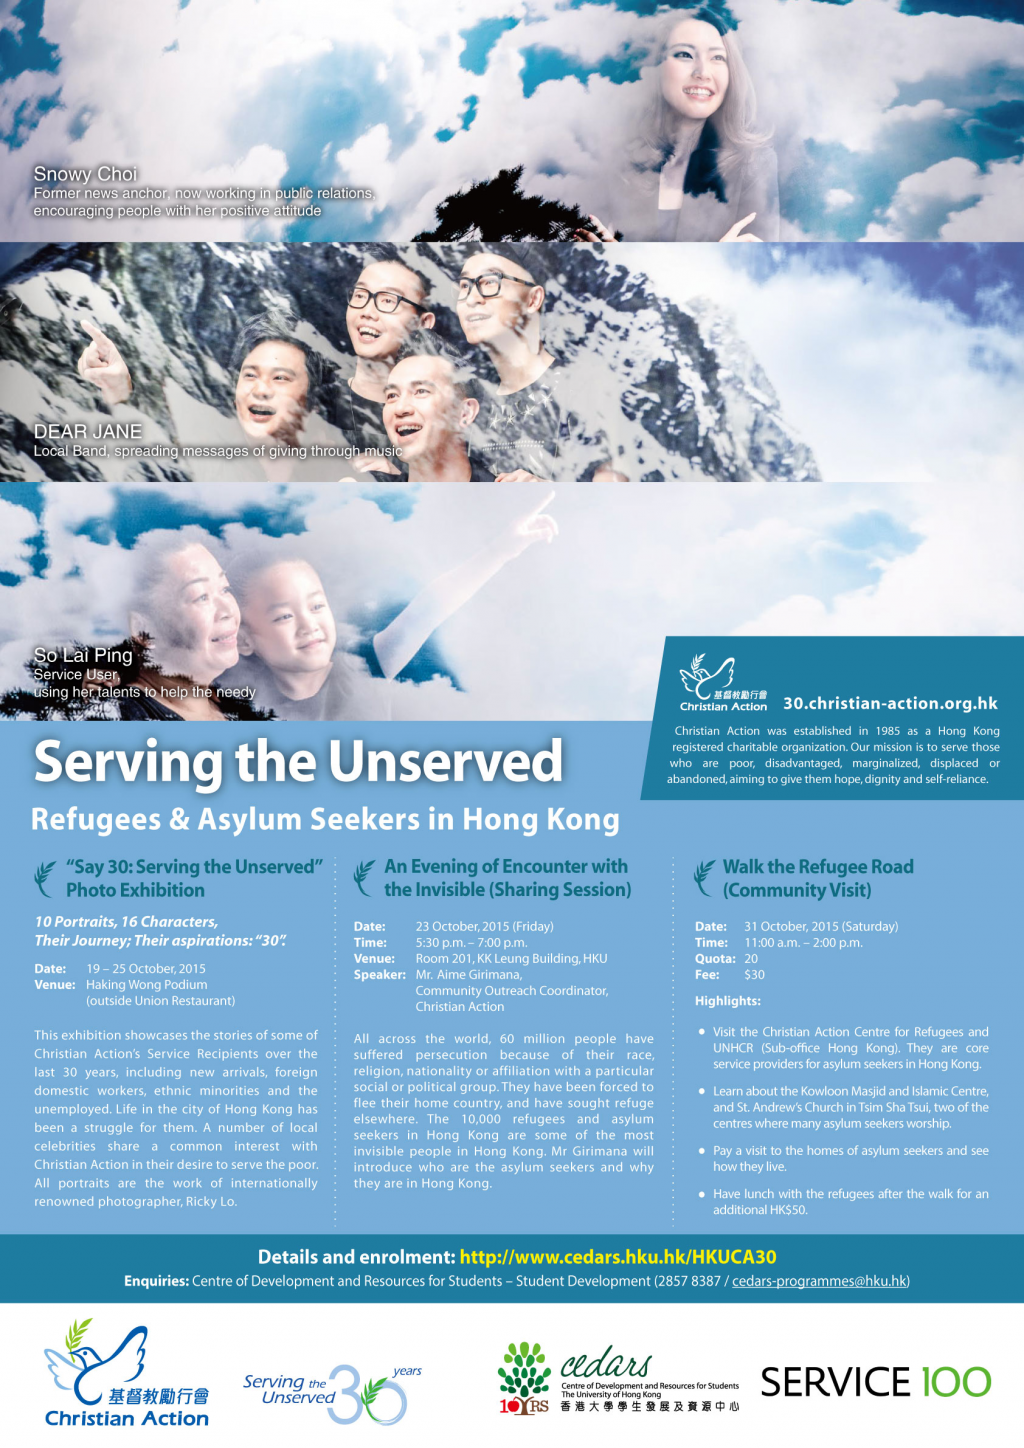 Serving the Unserved: Refugees and Asylum Seekers in Hong Kong